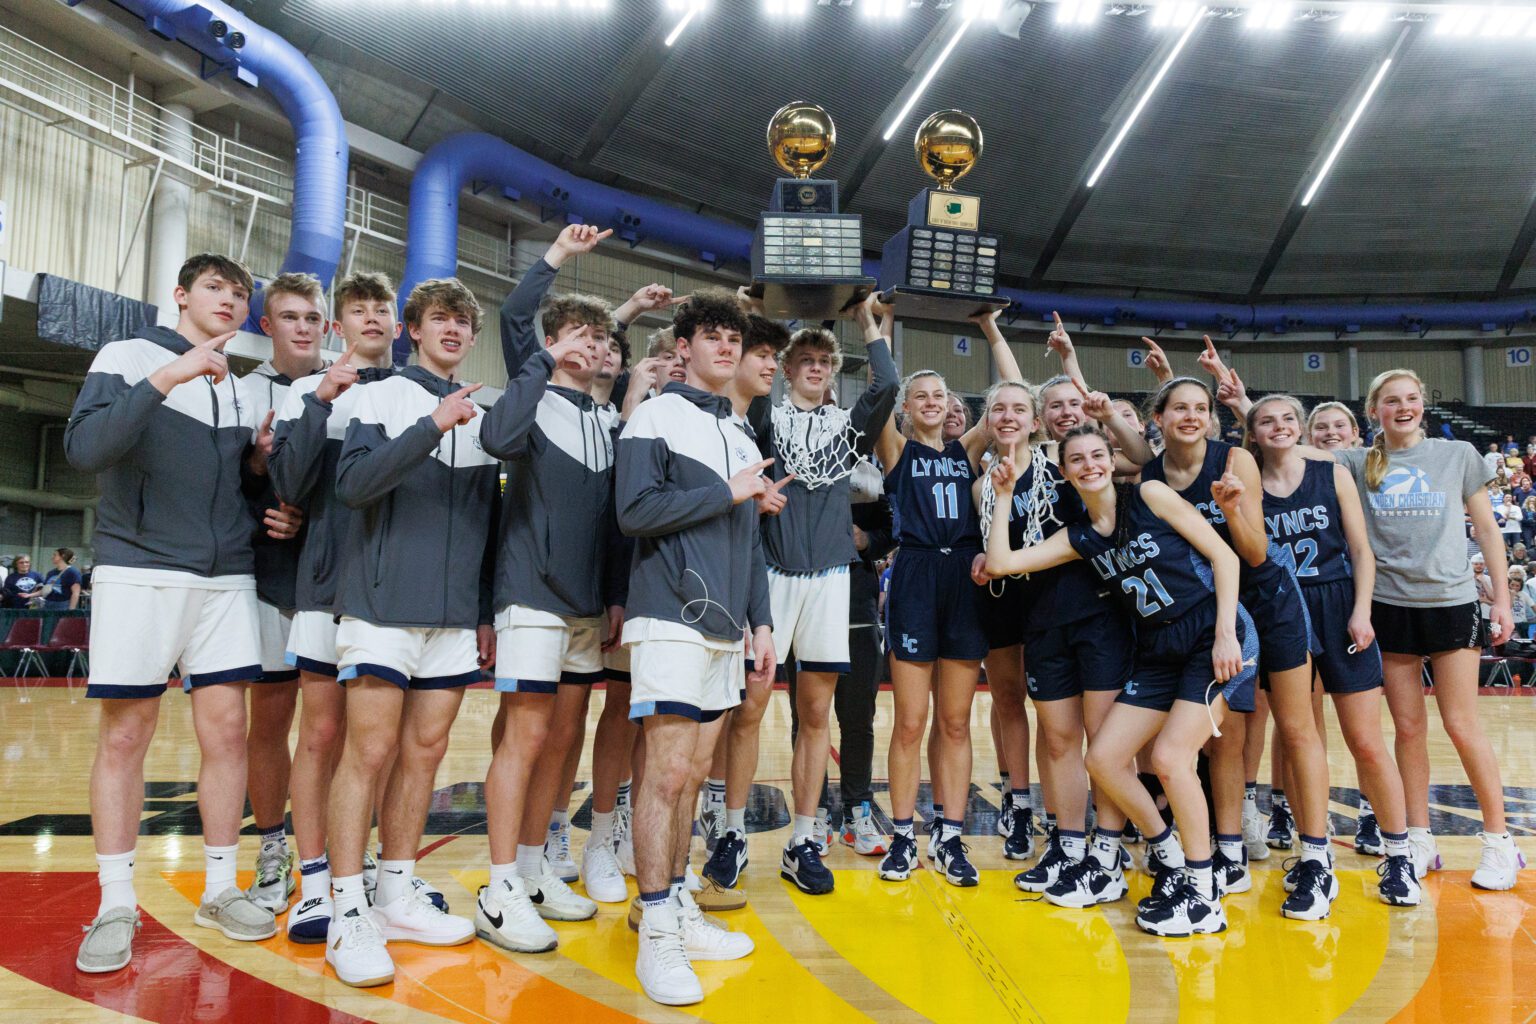 The Lynden Christian boys and girls basketball teams celebrate as both won their respective 1A state championship titles at the Yakima Valley SunDome last season on March 5